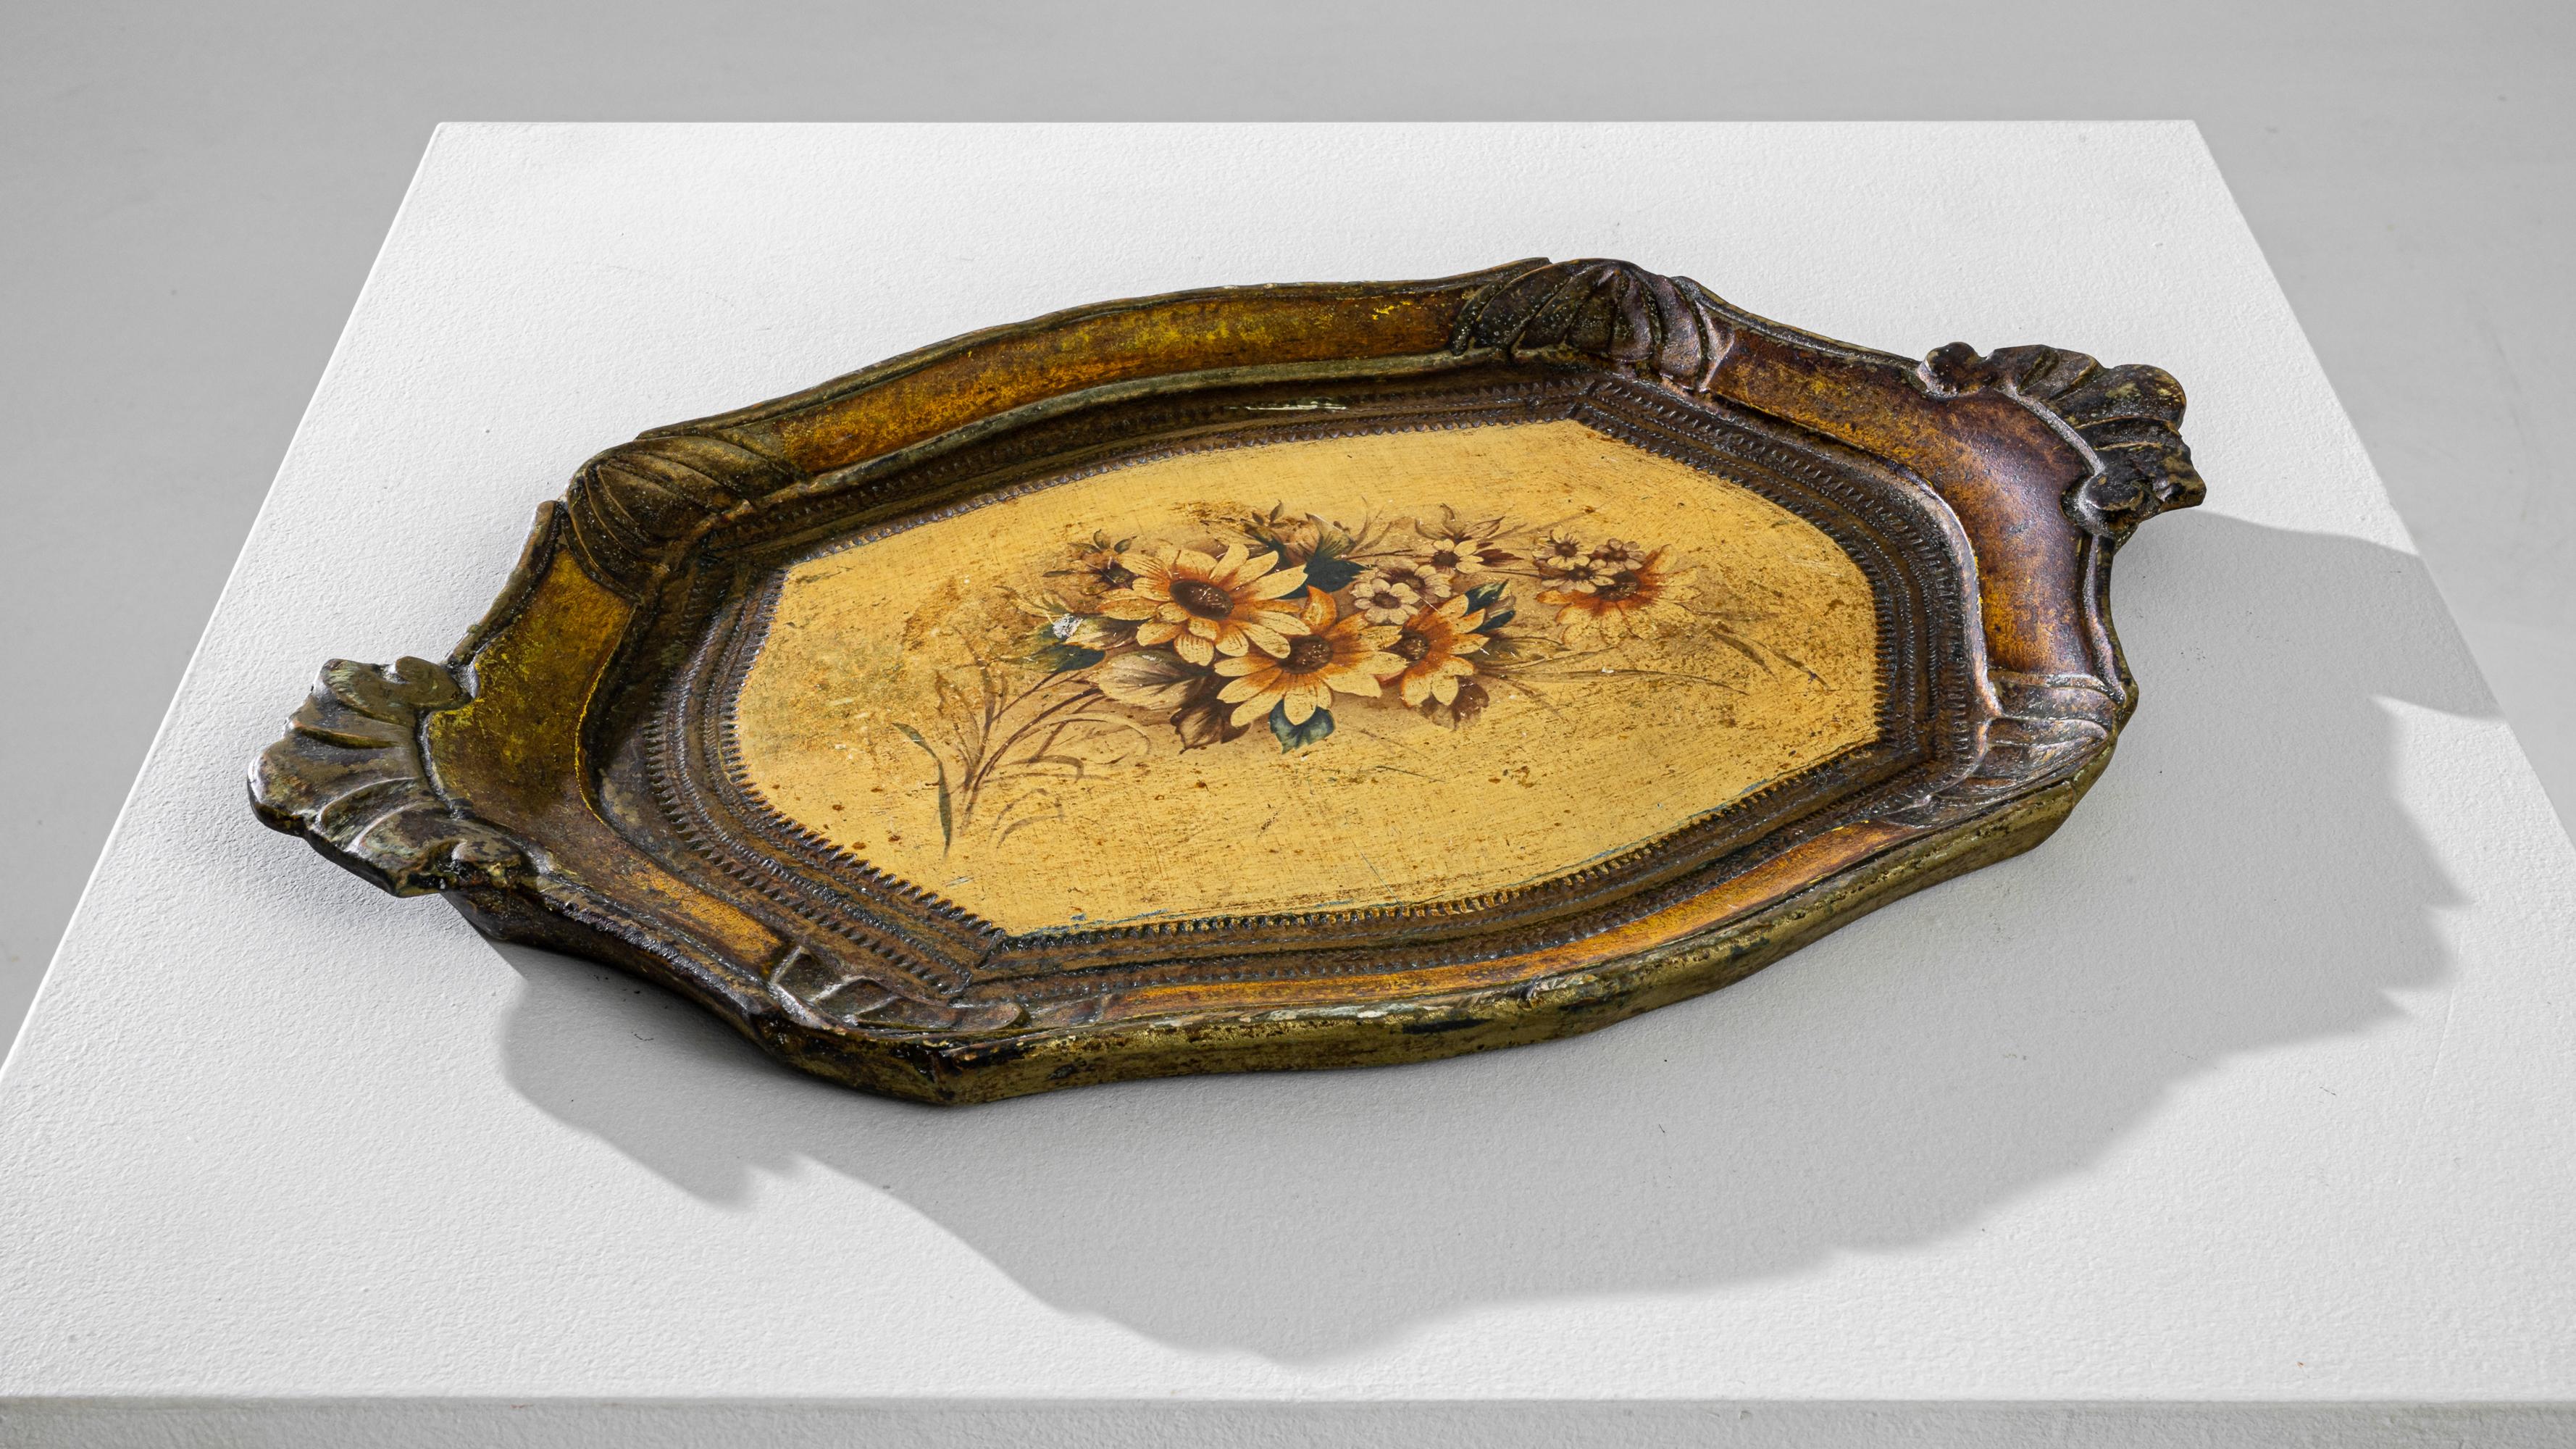 An elegant vintage tray hand-crafted in Italy circa 1960. Tempered by the ages of family dinner presentations, rich texture and color meet at this miniature table. A seductive outline is sculpted by its carved edges and enriched by the gilded